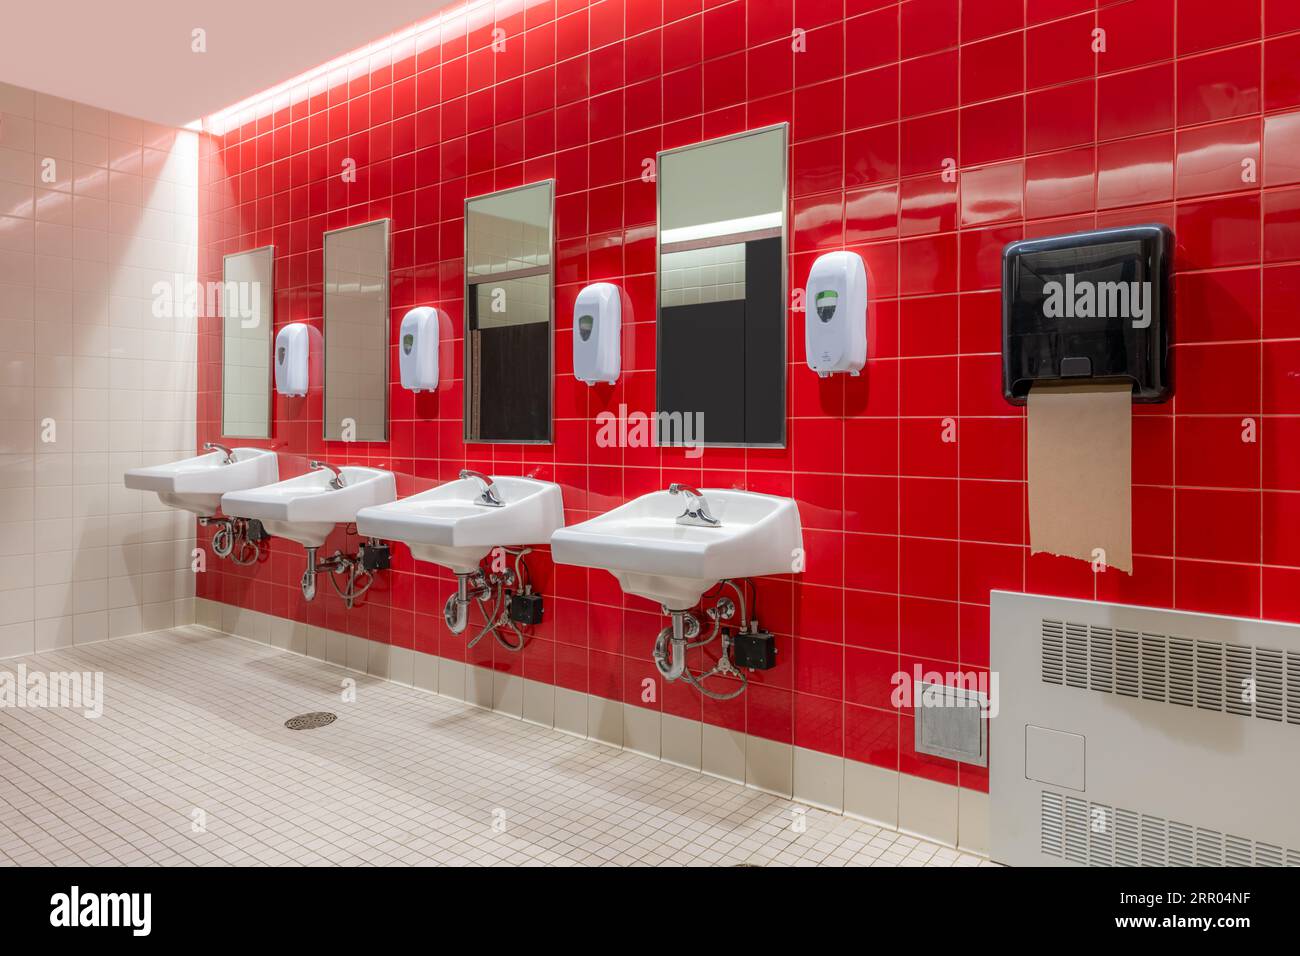 Public restroom with red tile and four, lavatories, sinks Stock Photo